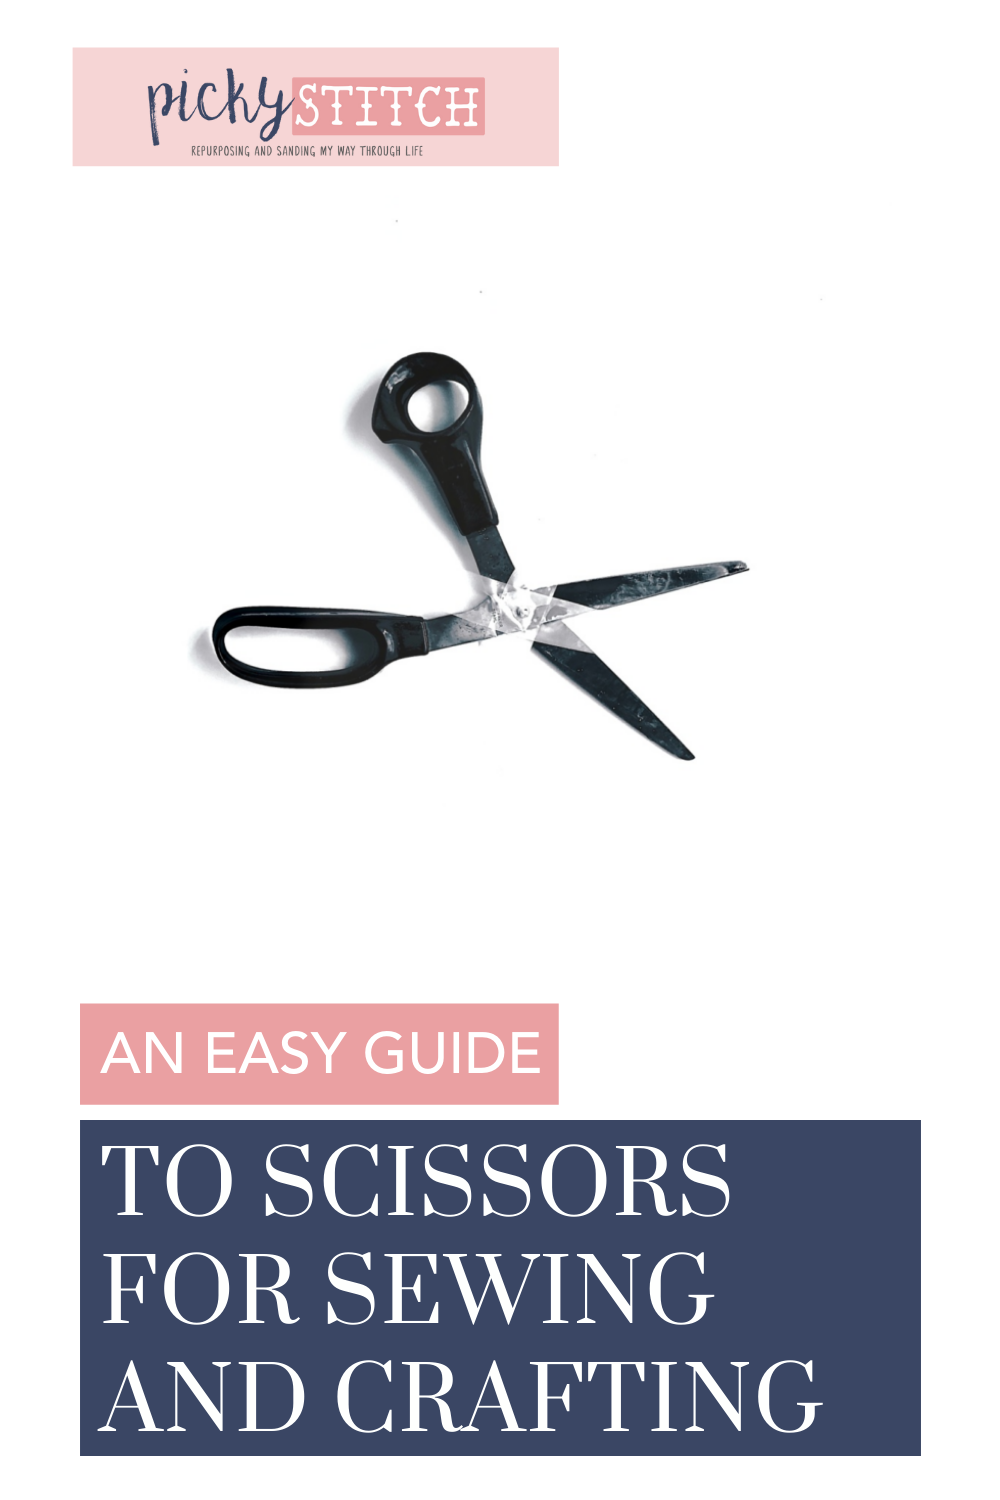 Pickystitch.com has all the best ideas to put the fun into craft projects! If you have a like sewing, you might be all of the scissor options in the store. Check out this simple guide to learn the different types of sewing and crafting scissors now!